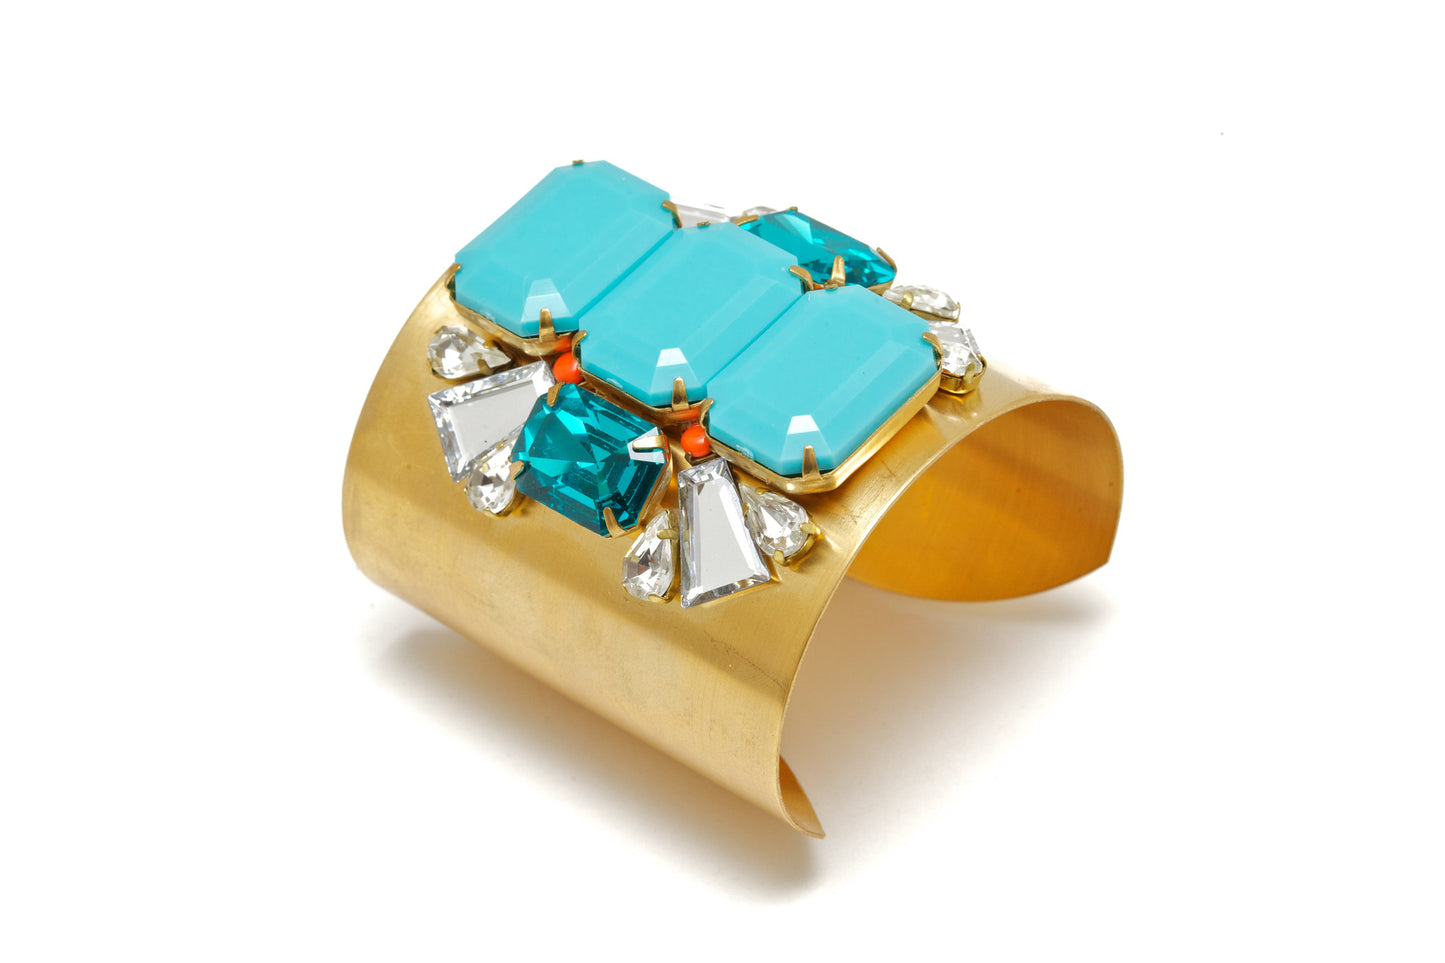 Gold and Turquoise jeweled cuff